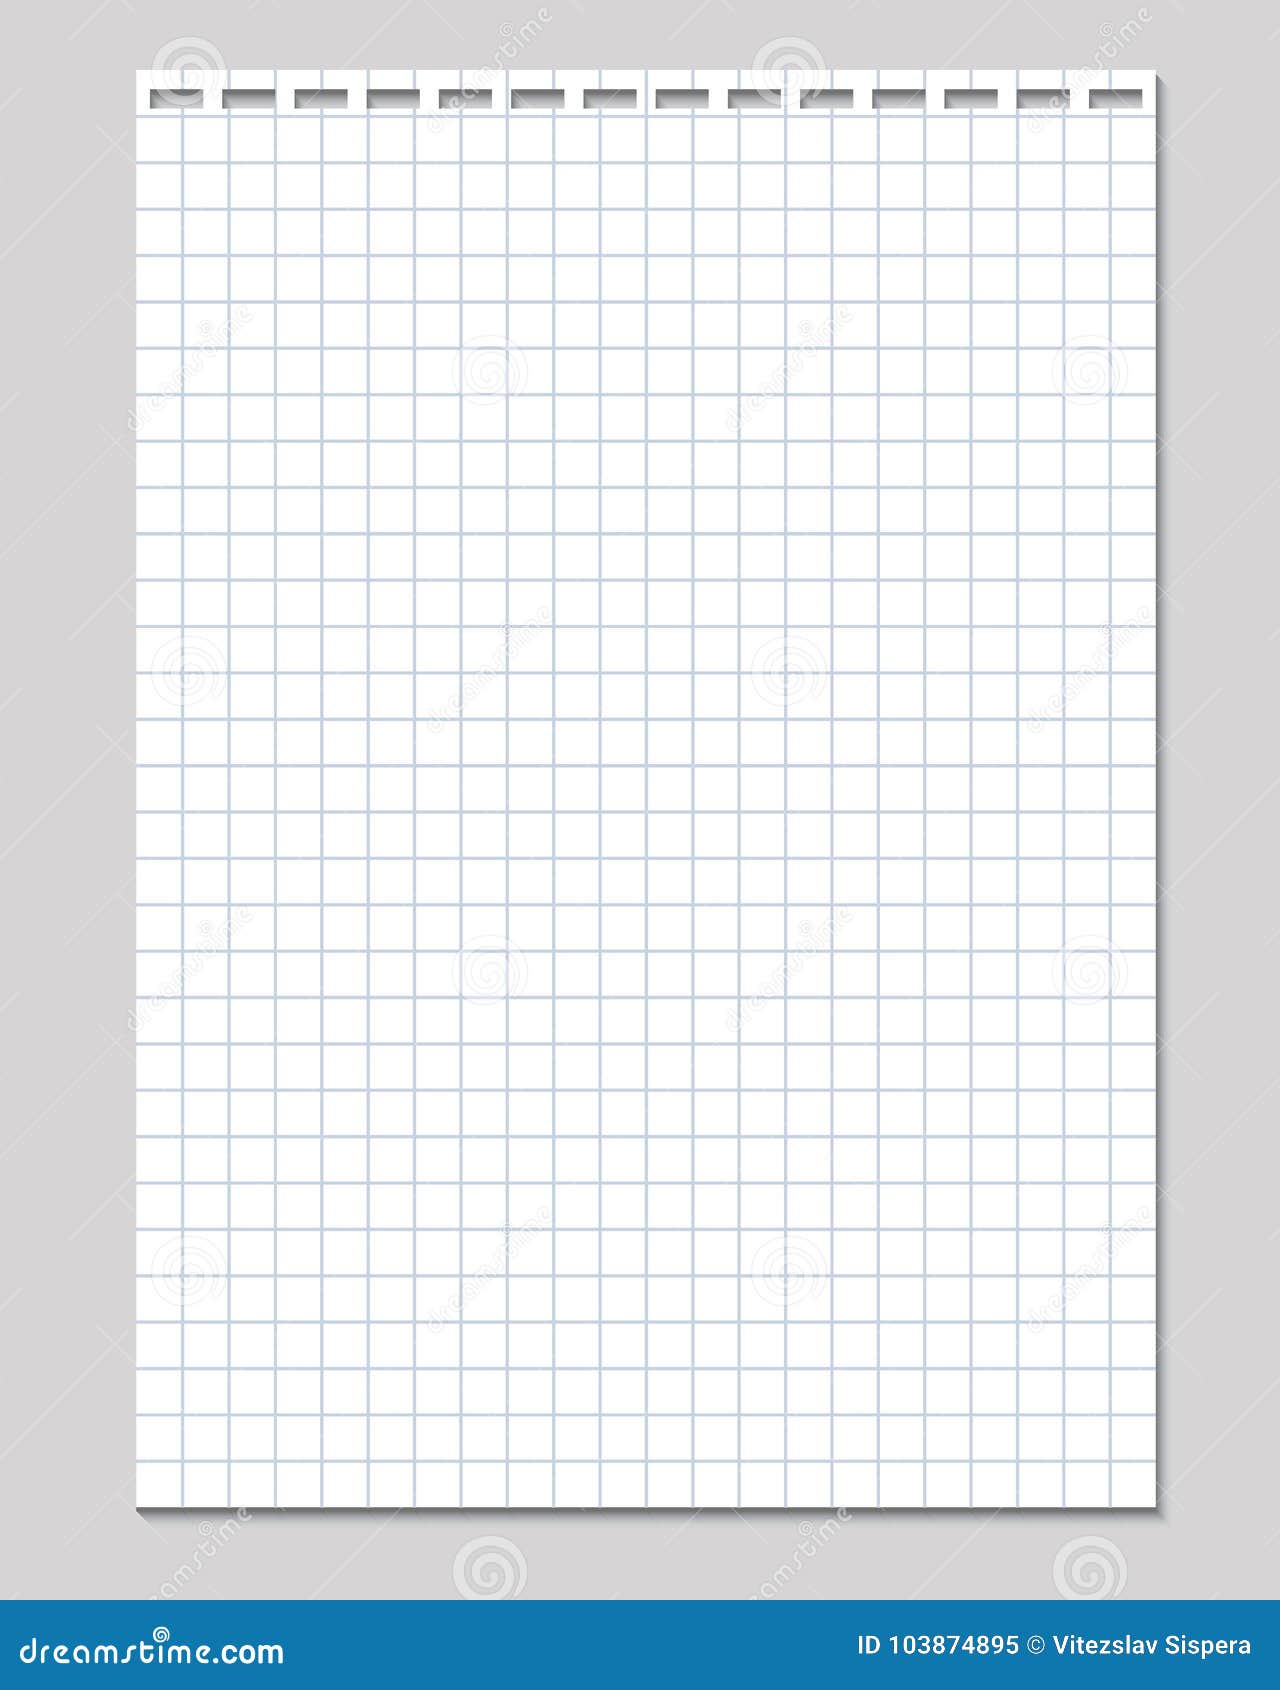 Realistic Vector Illustration of Blank Sheet of Square Paper Fro